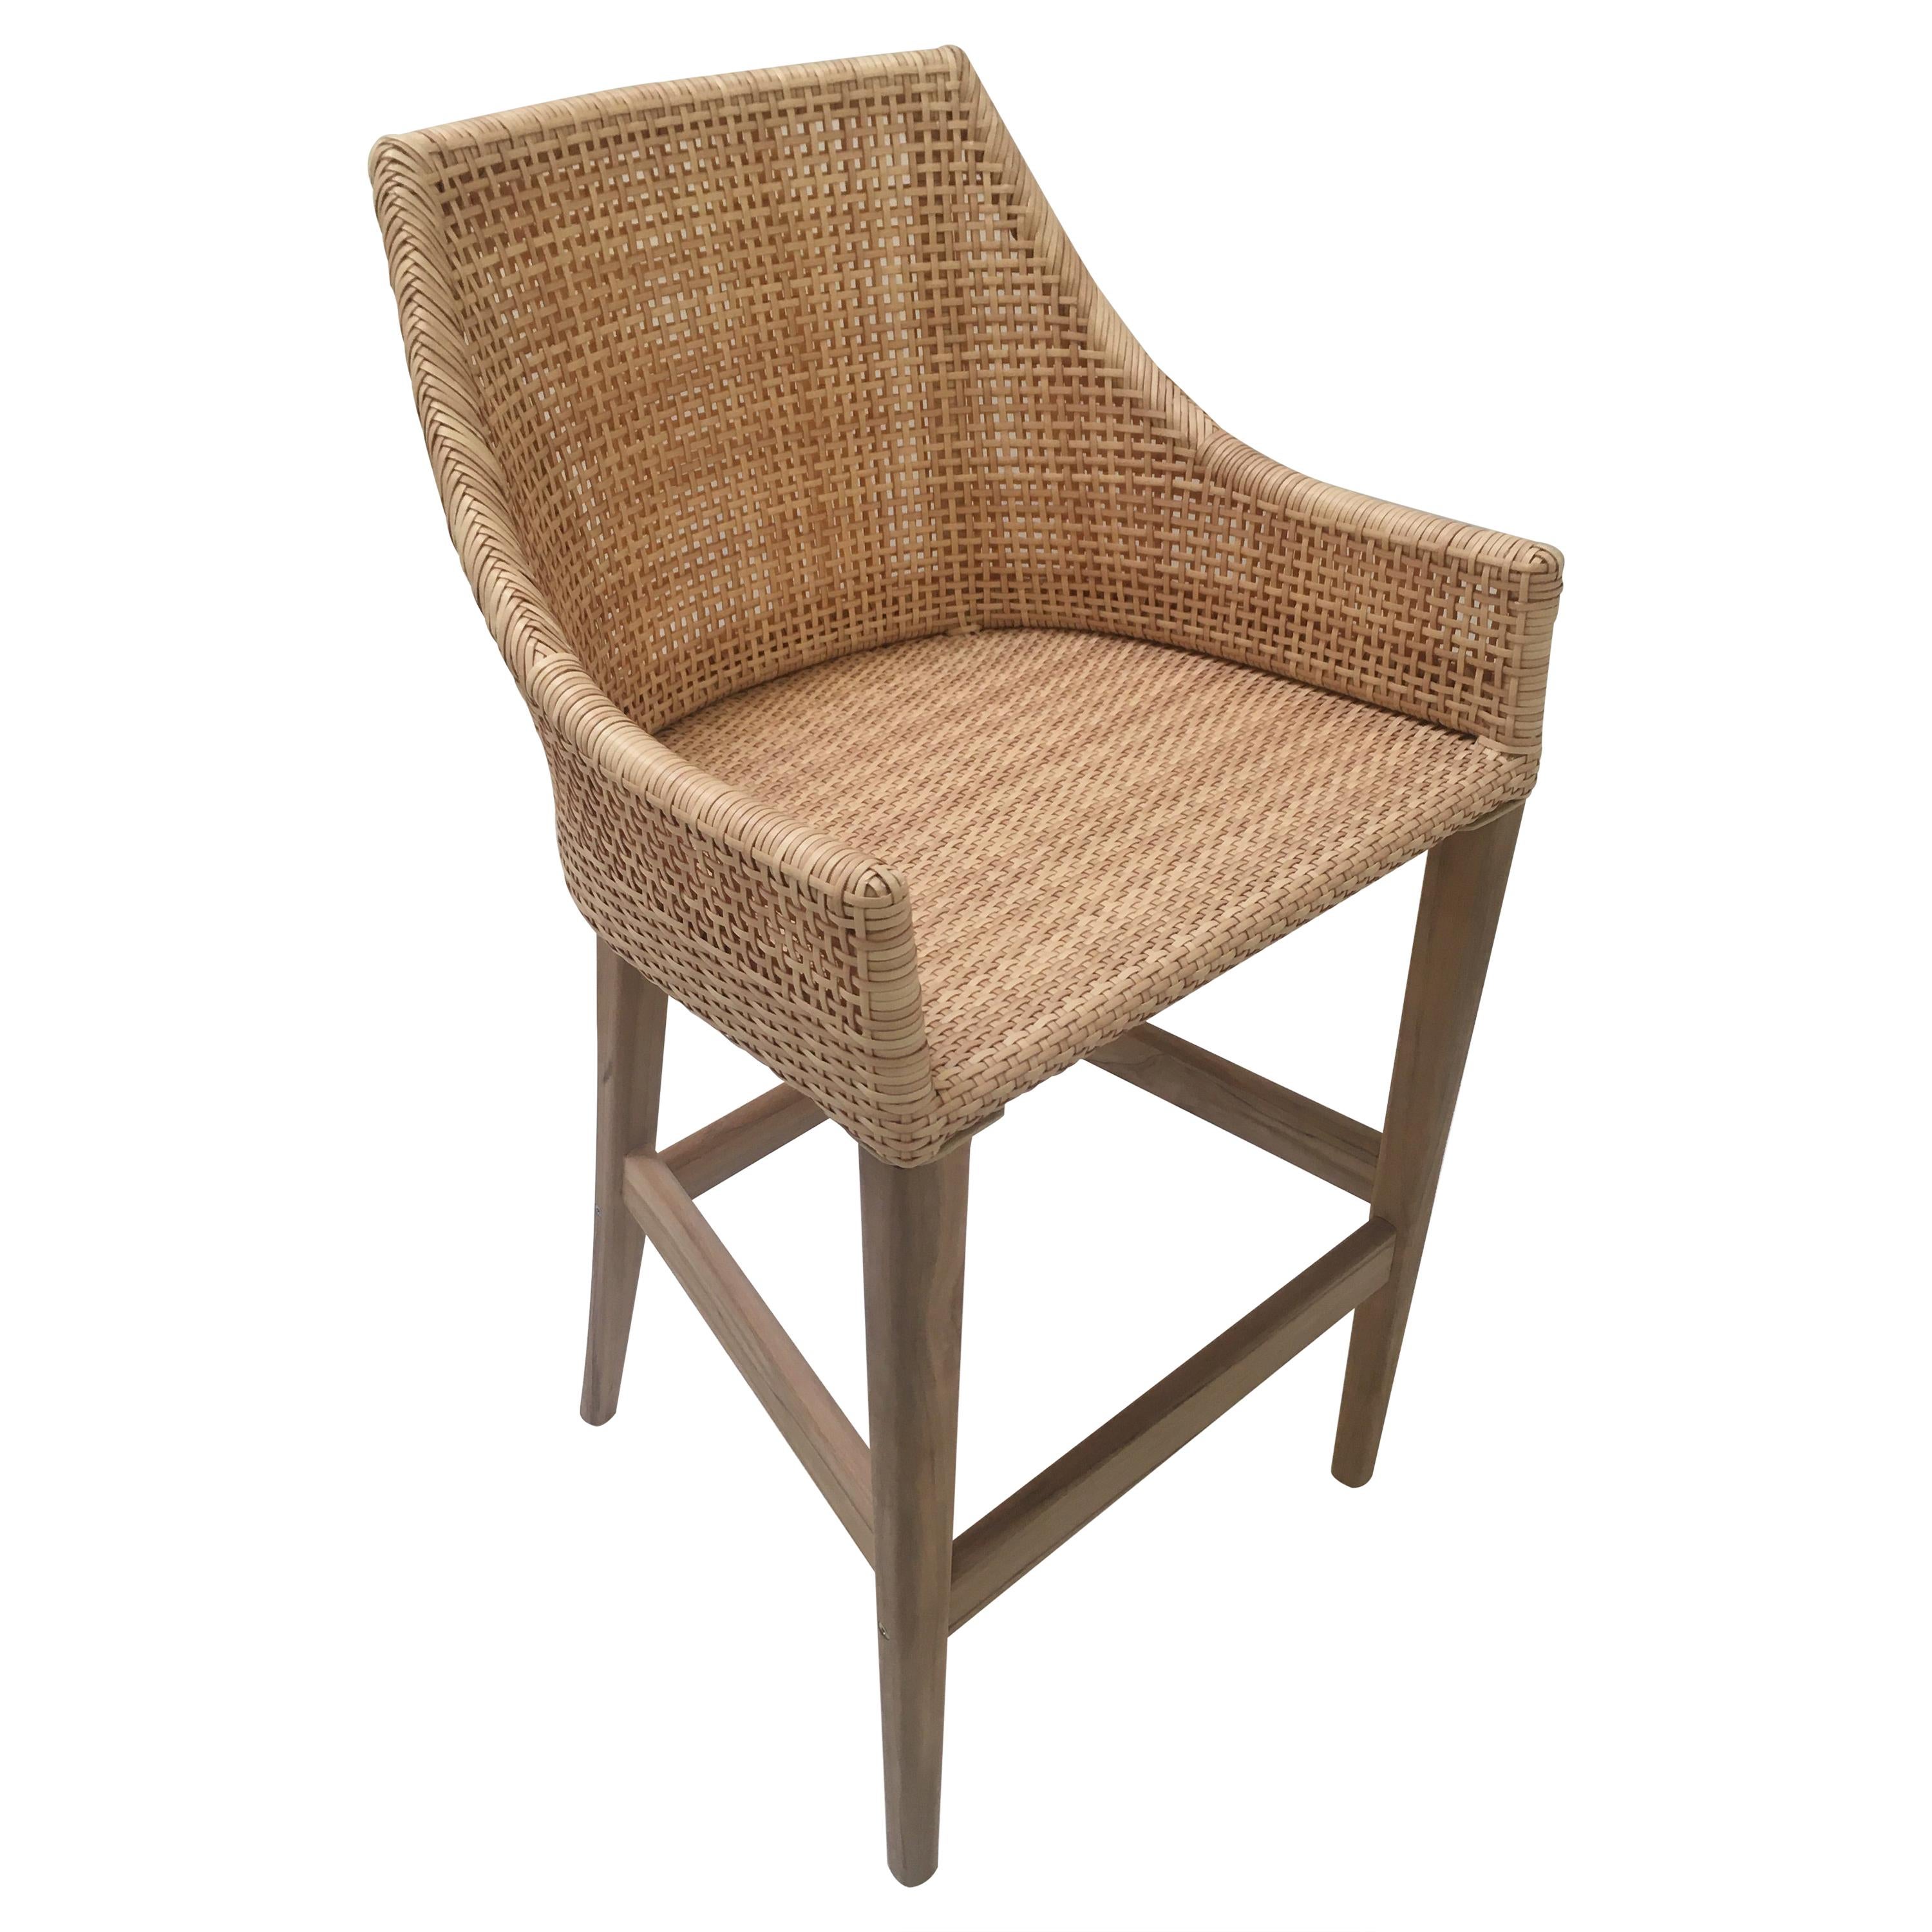 Teak Wooden and Braided Resin Rattan Effect Outdoor Bar Stool